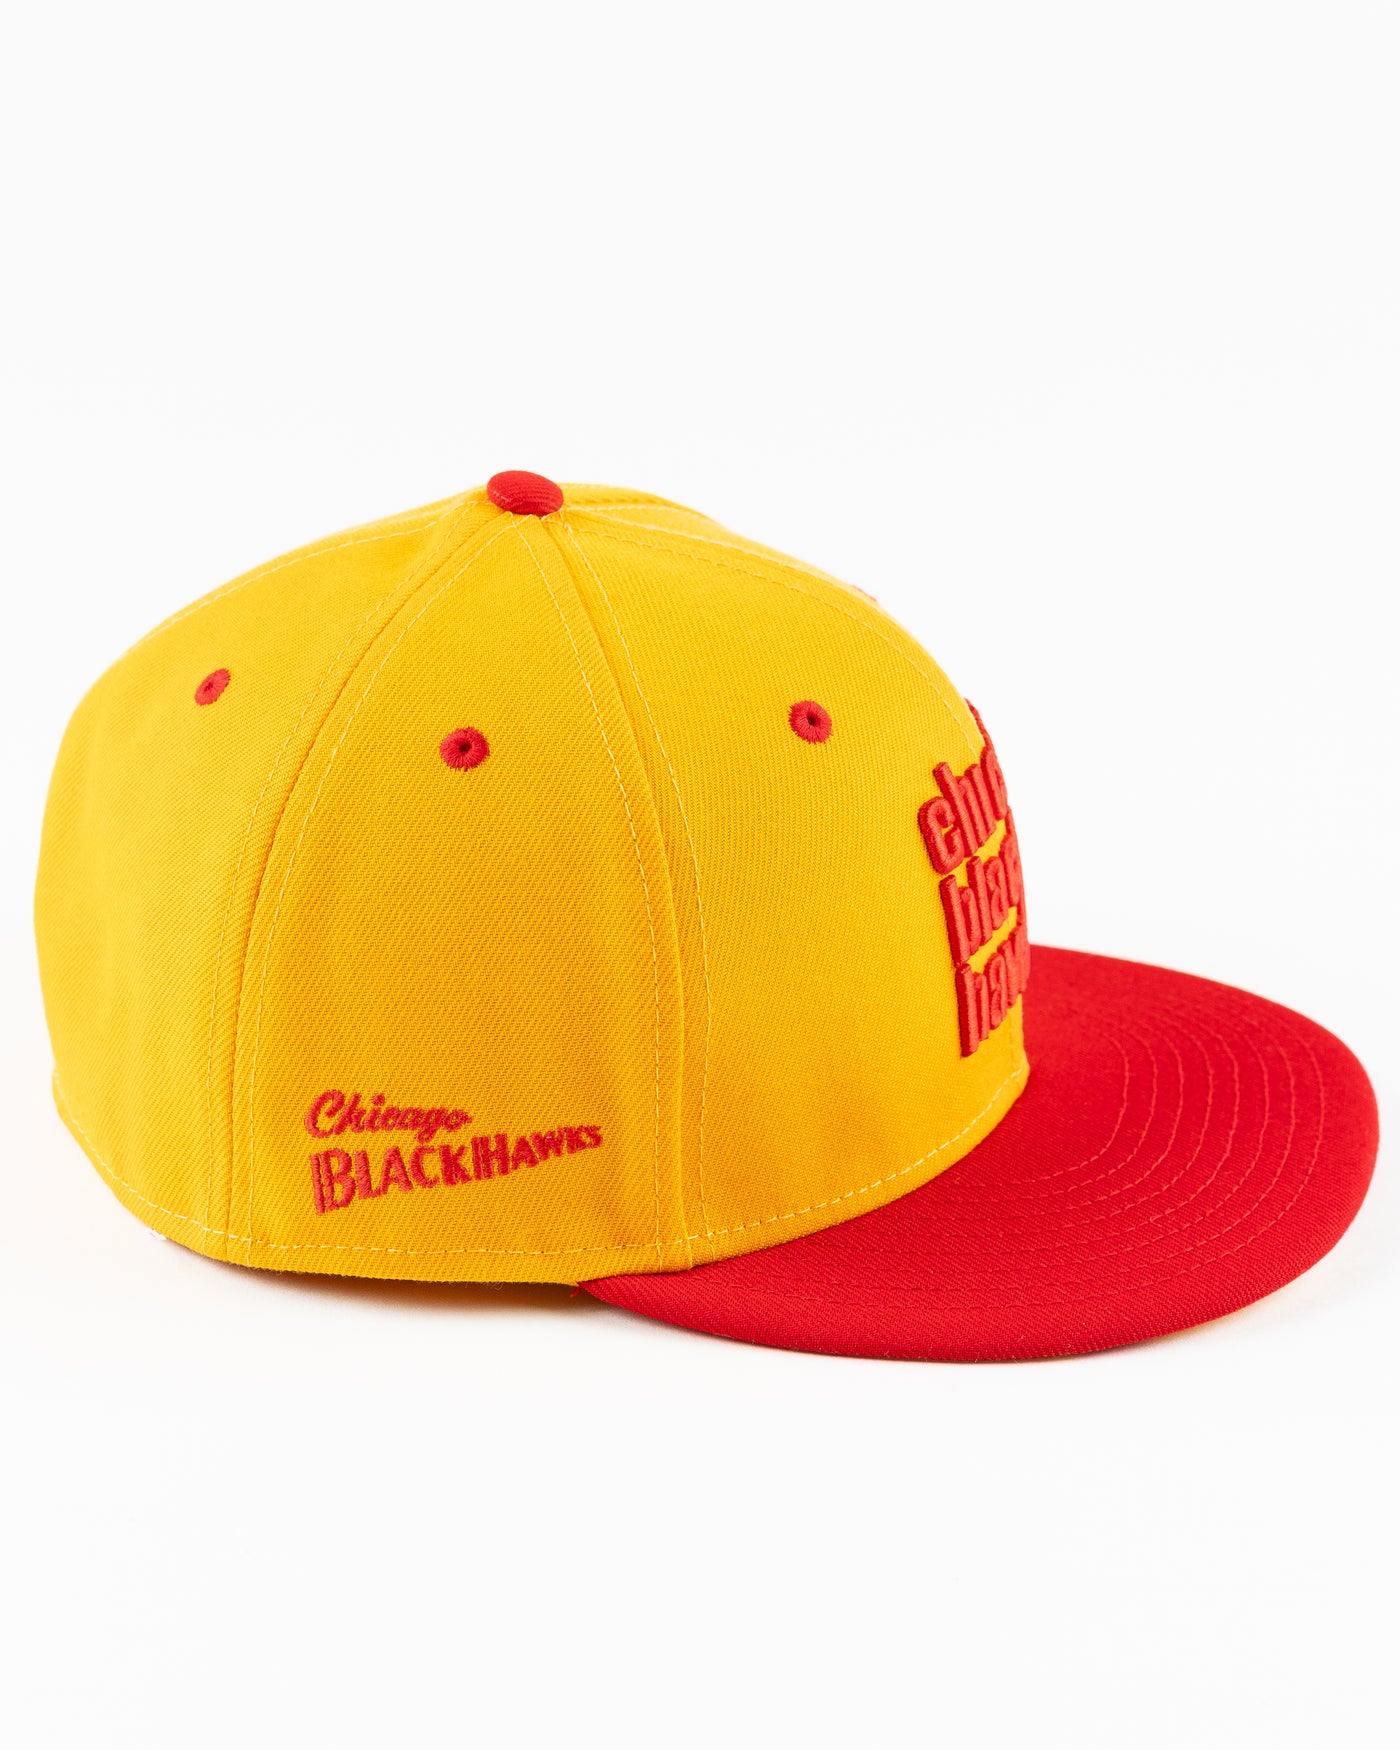 yellow and red New Era fitted cap with Chicago Blackhawks wordmark on front - right side lay flat